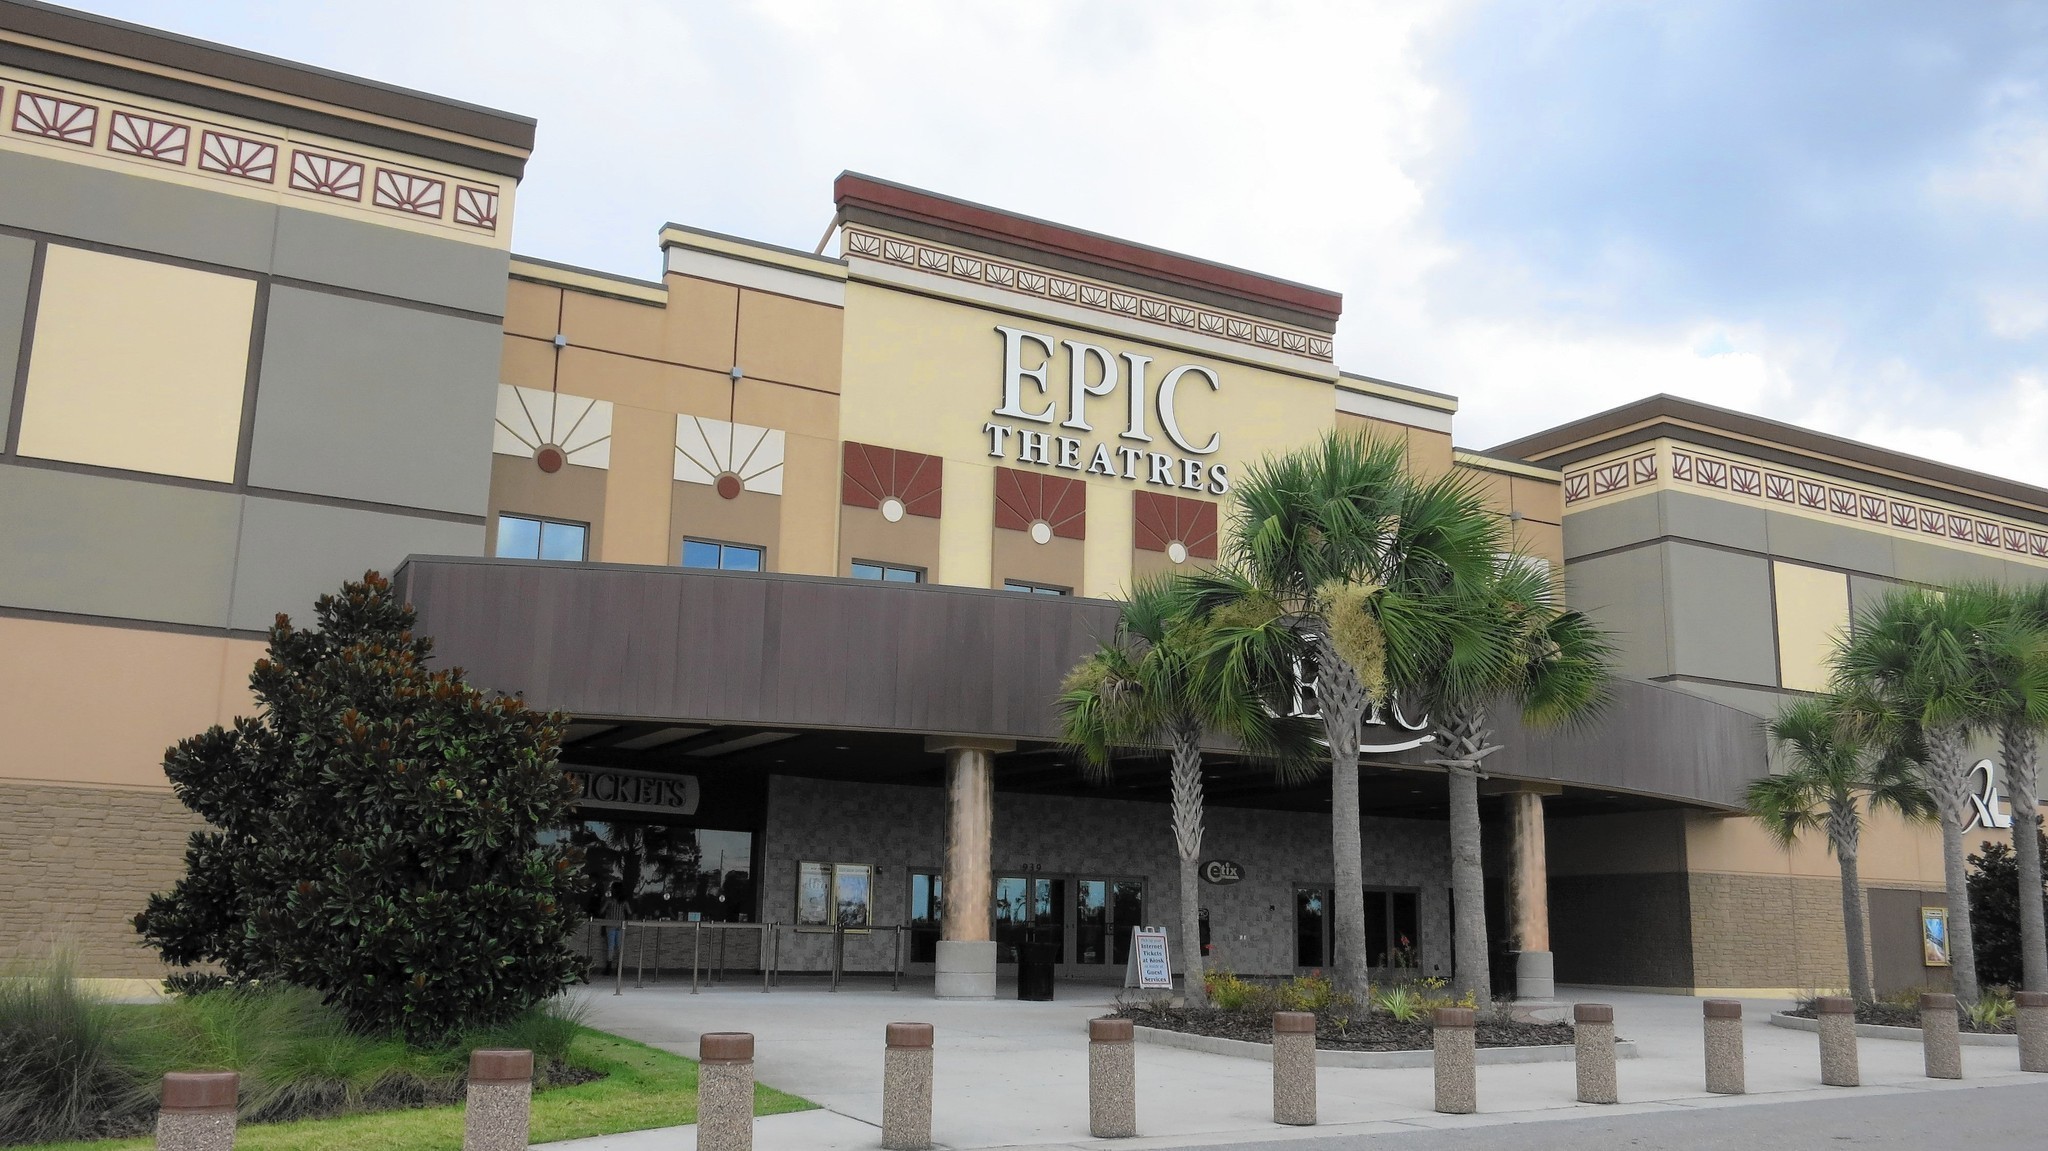 Central Florida-based Epic Theatres thrives with cushy seats, giant